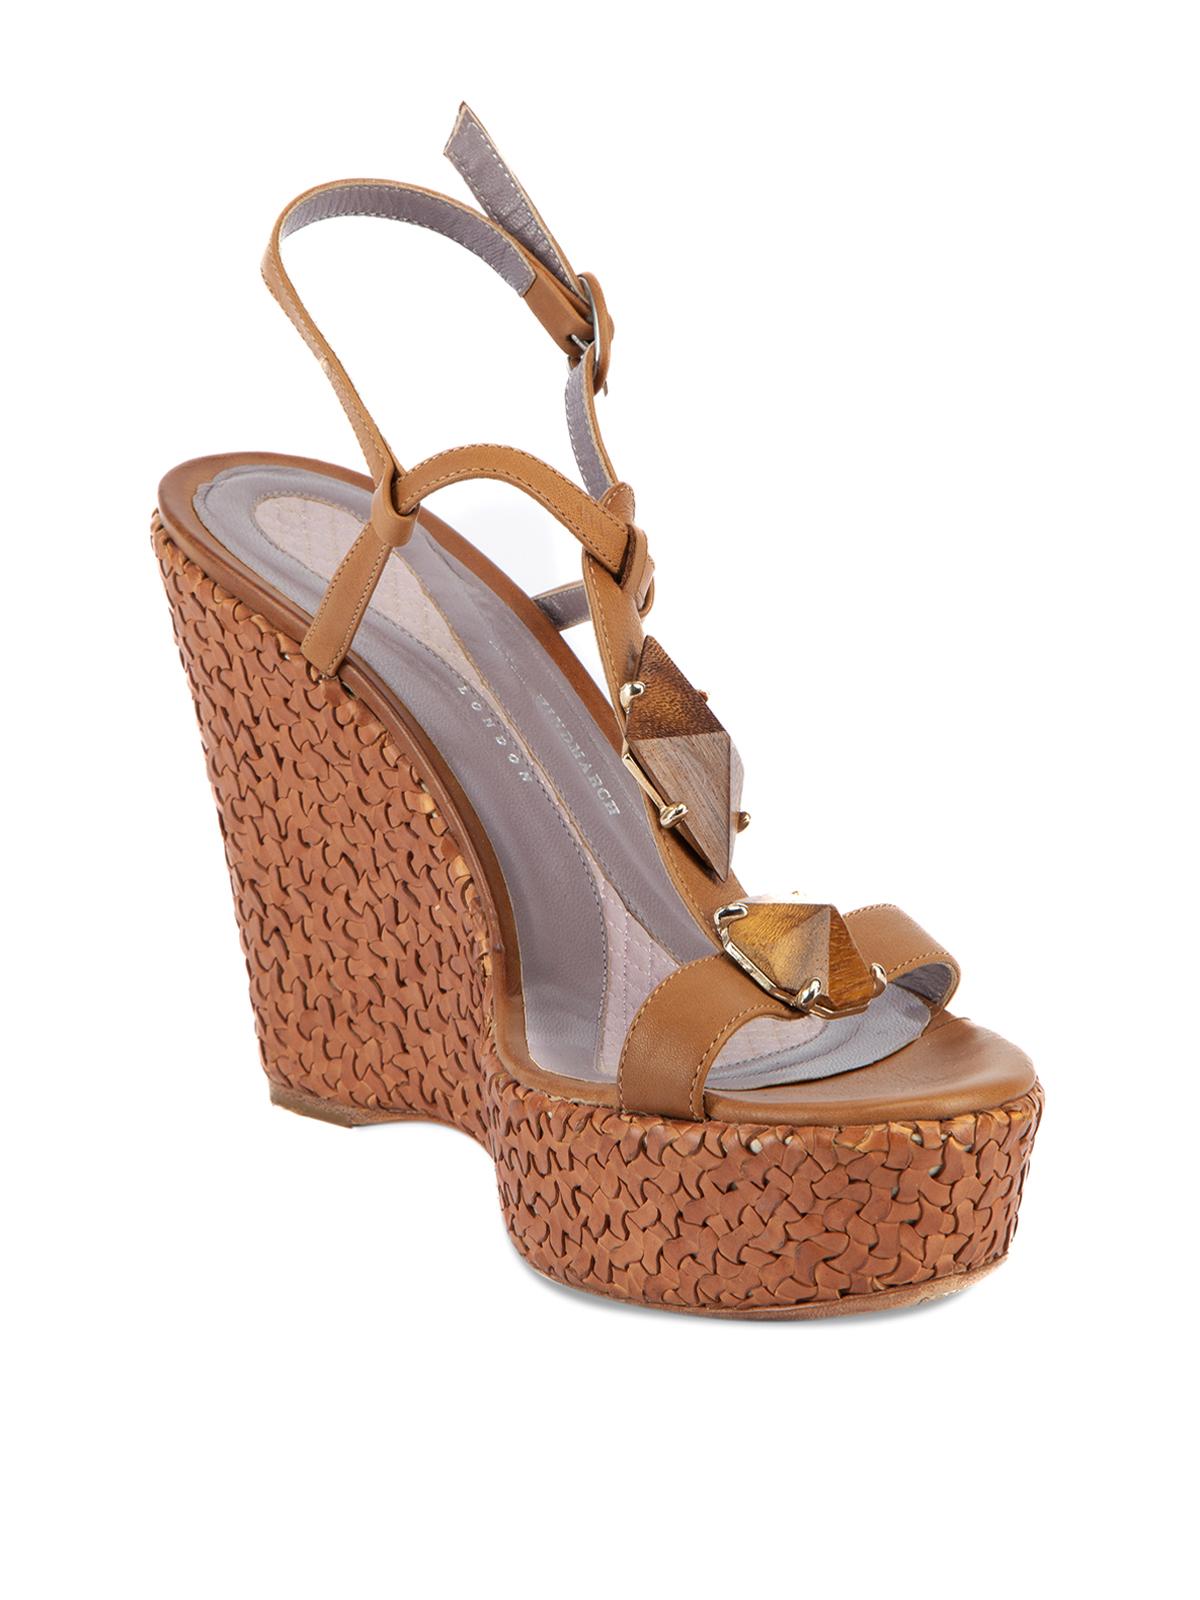 CONDITION is Very good. Minimal wear to shoes is evient. Light fraying along strap, wear to soles on this used Anya Hindmarch designer resale item. Details Brown Leather Sandals Peep almond toe Wedge platform heel Woven wedge design T strap Ankle